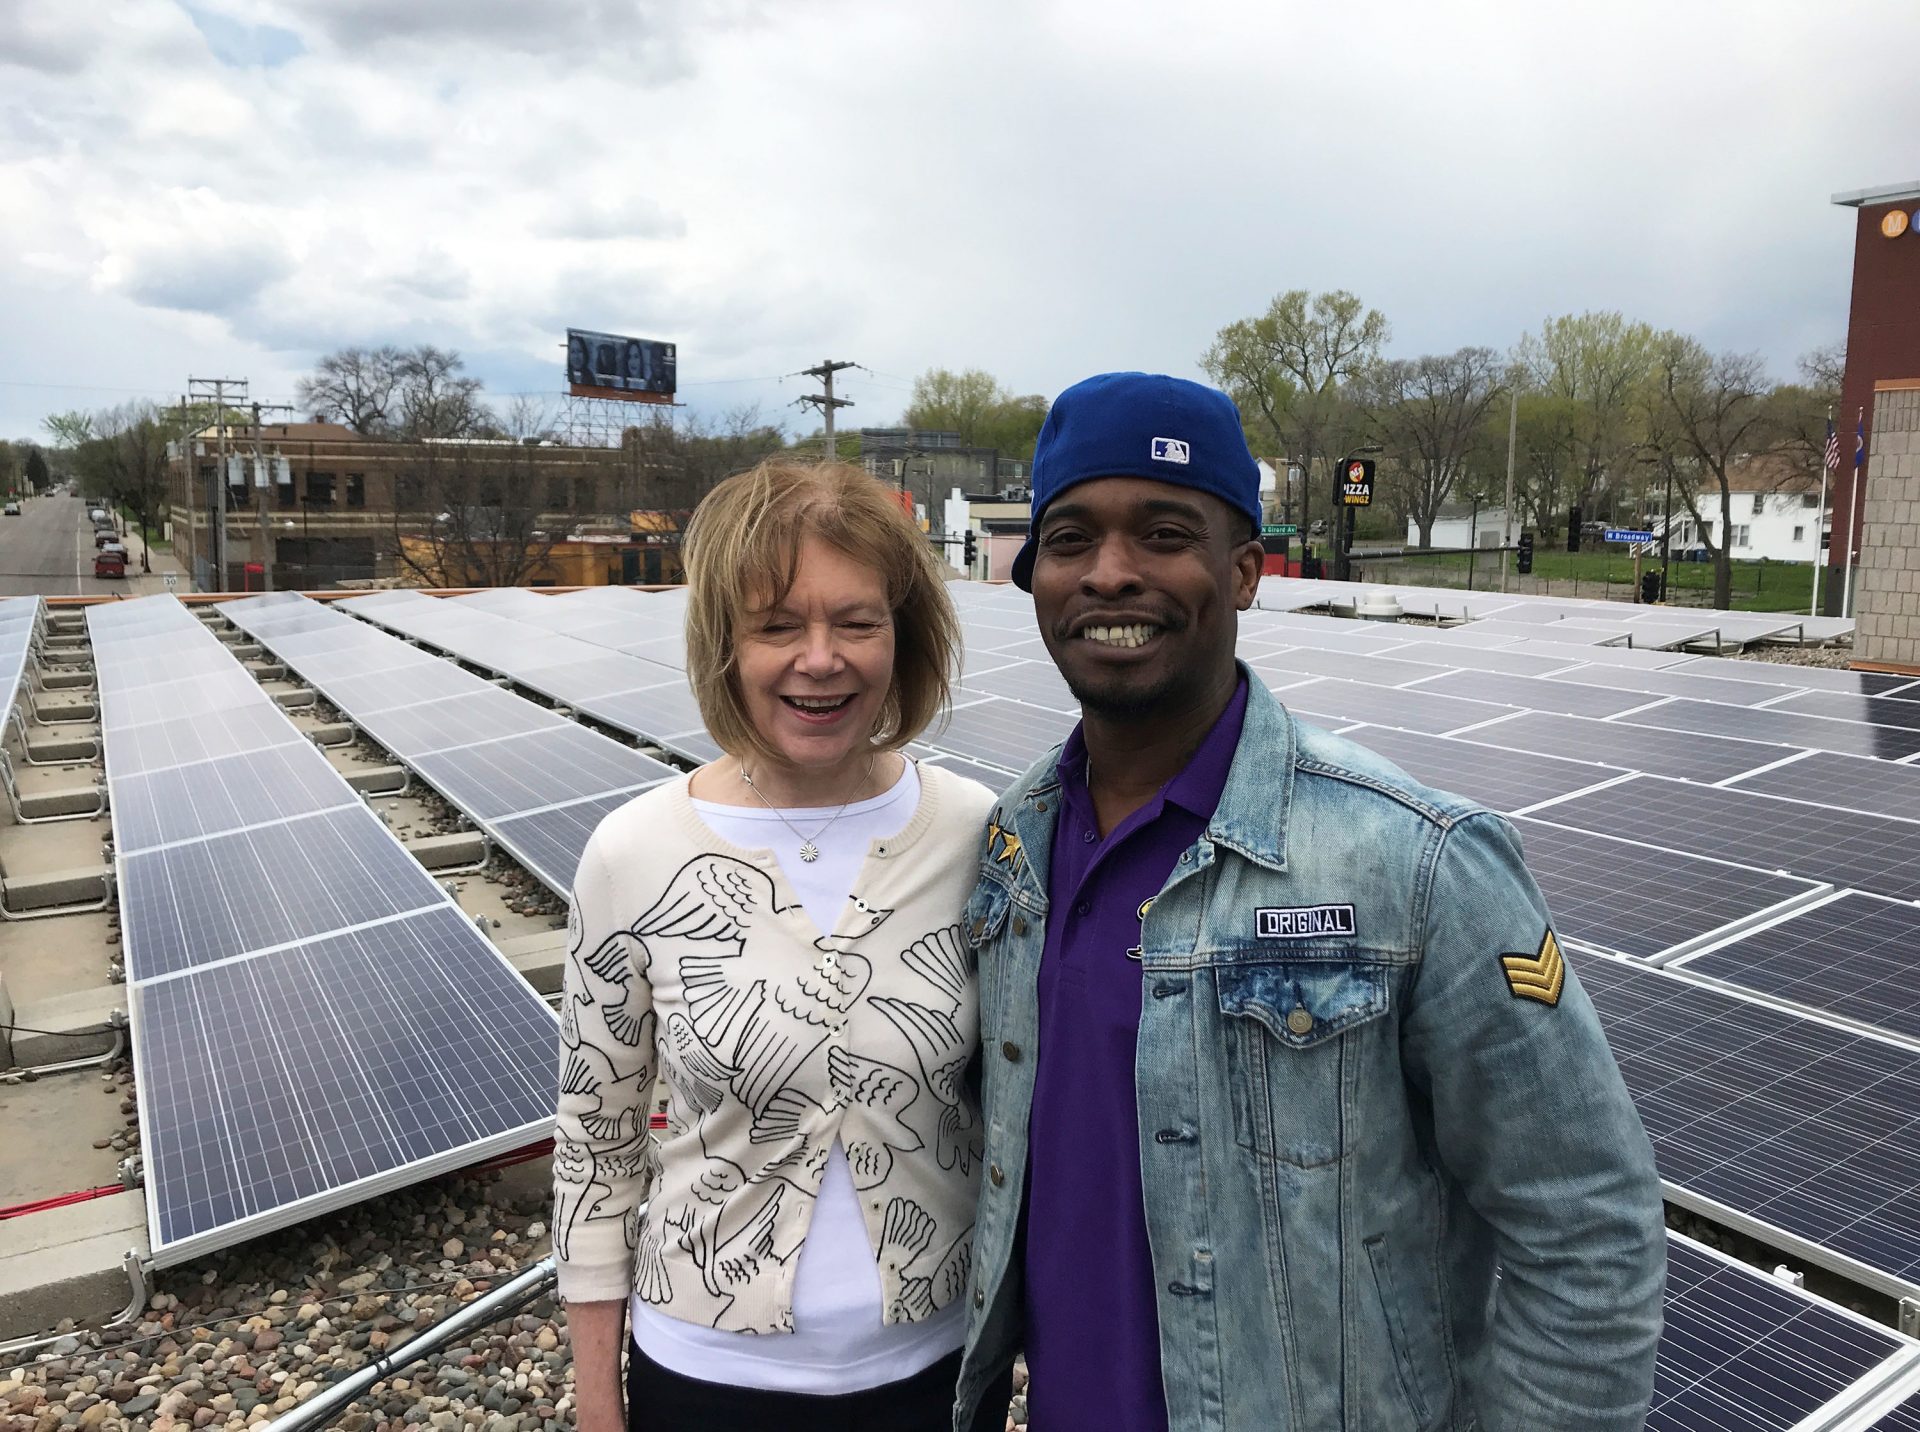 Sen. Tina Smith, D-Minn., and Keith Dent stand in front of the community solar garden on the roof of Shiloh Temple in Minneapolis. Dent helped install the array.